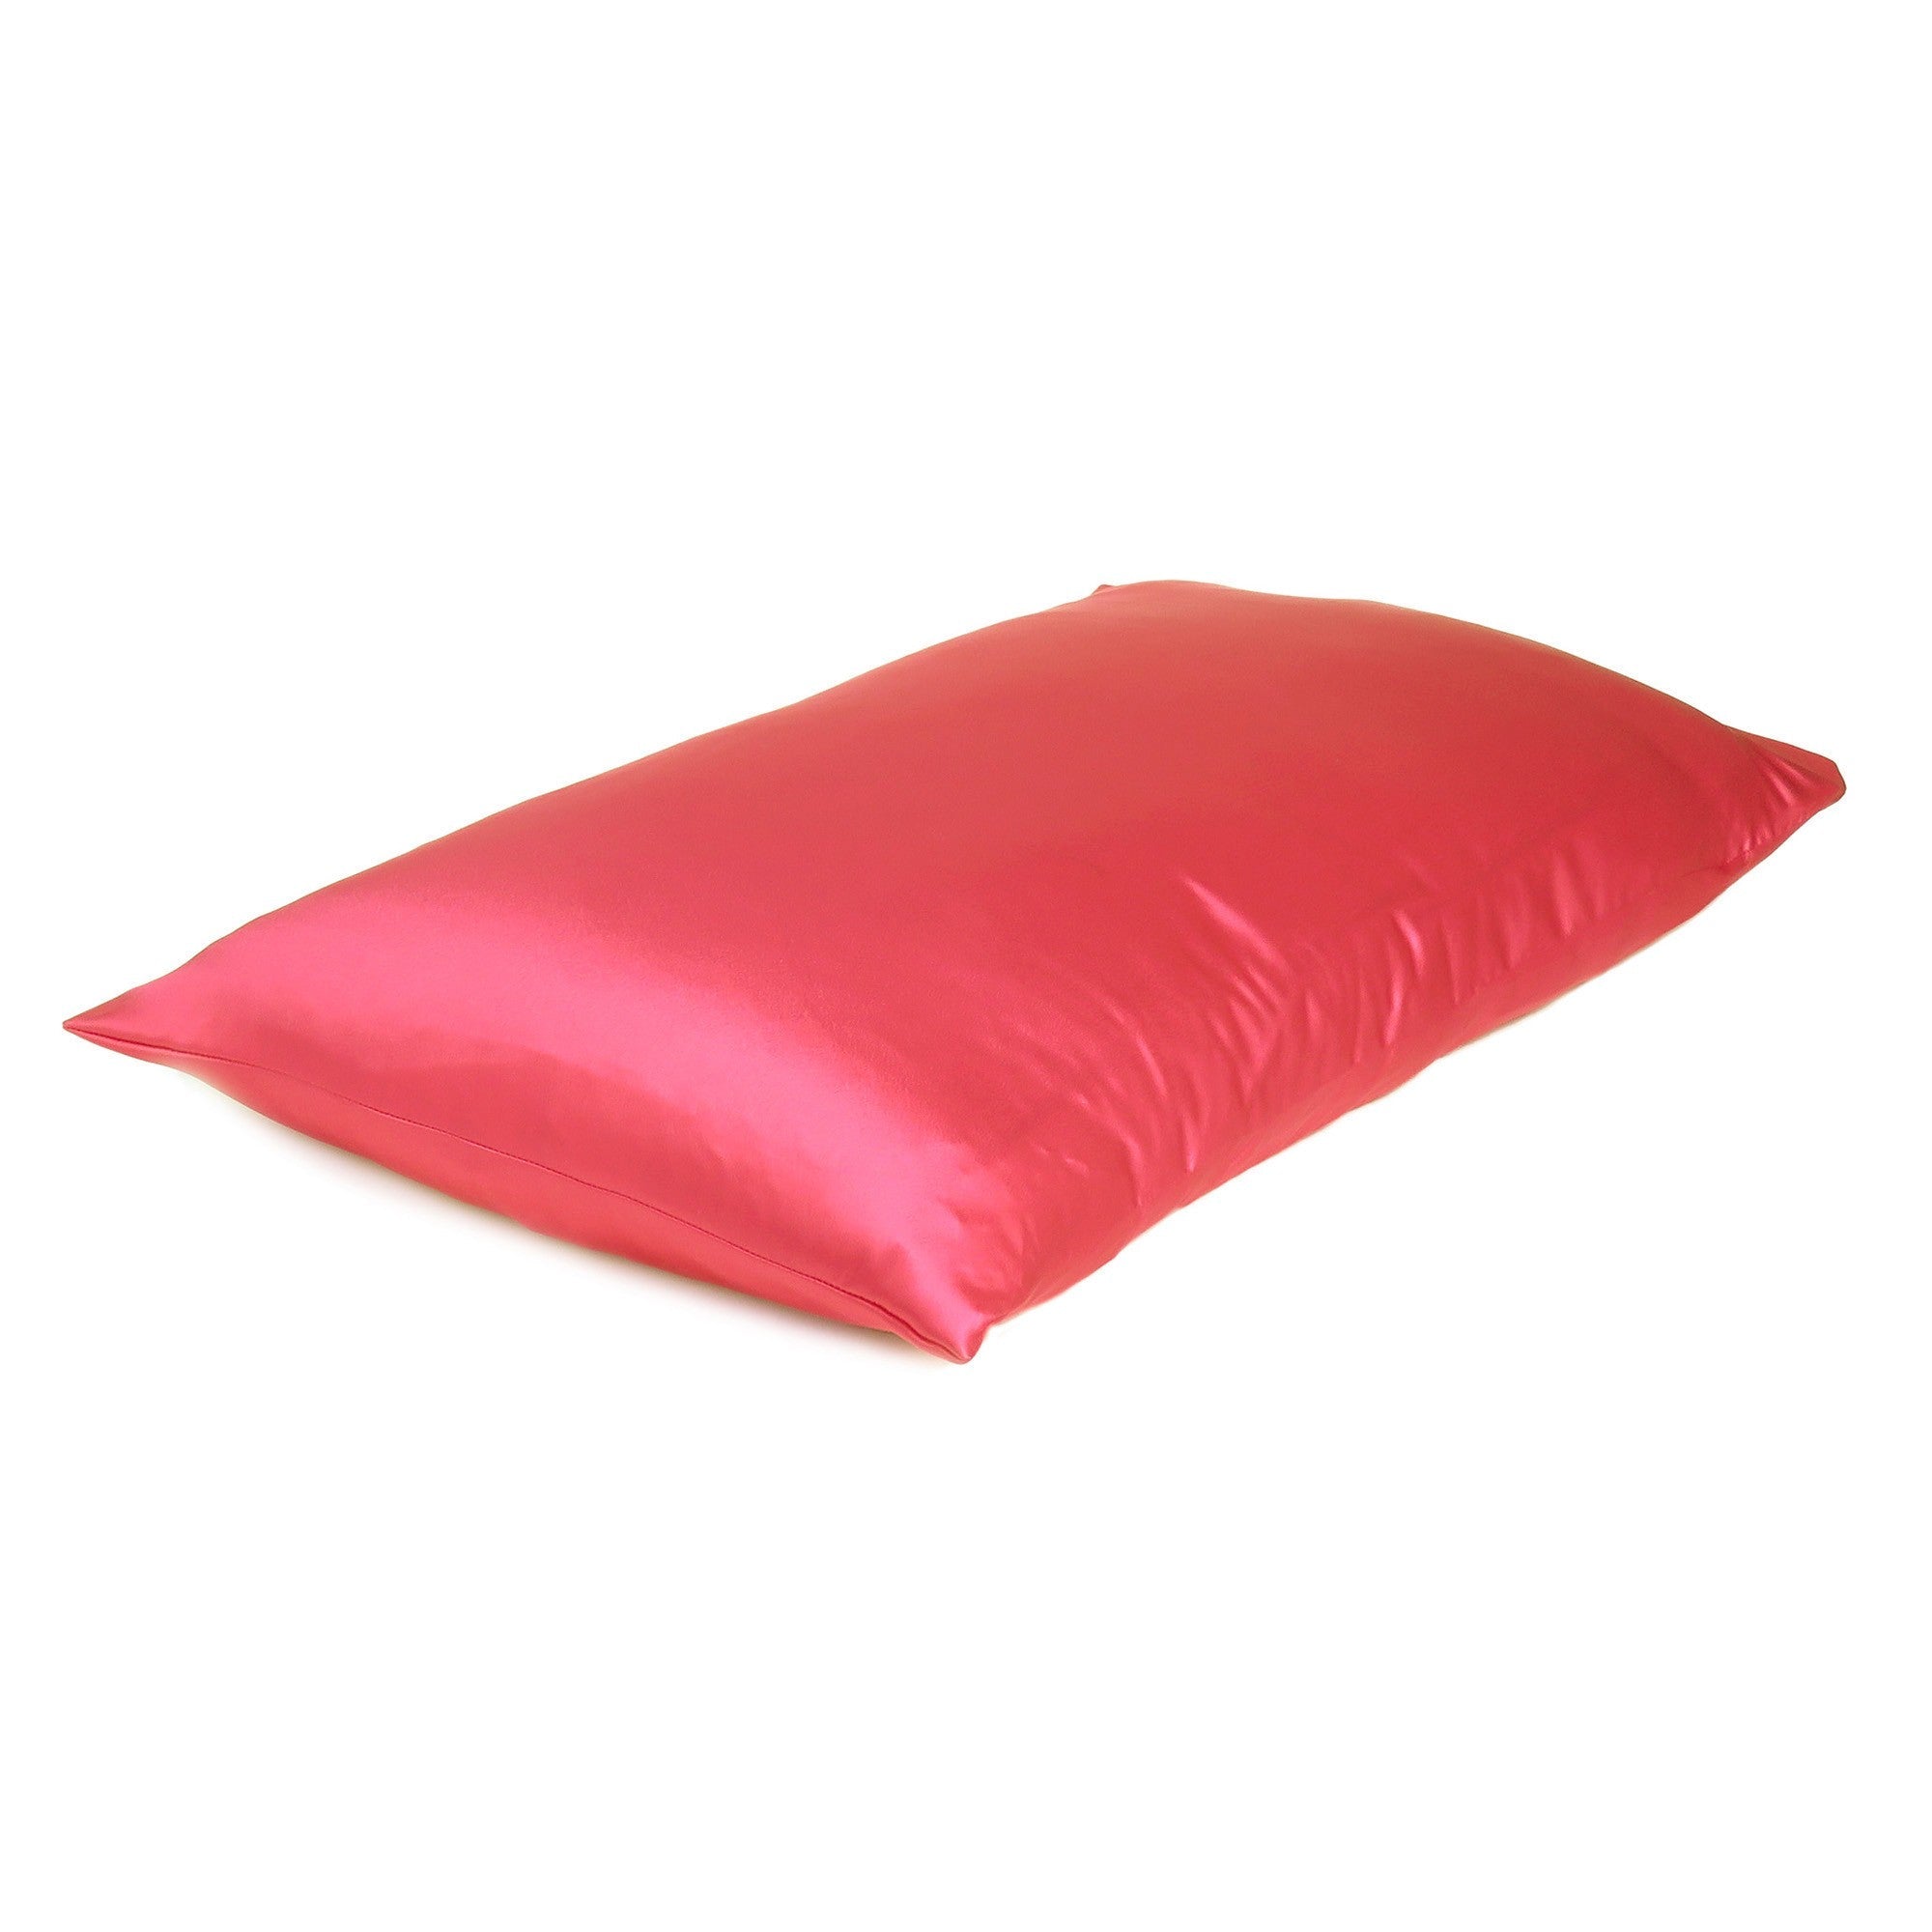 Poppy Red Dreamy Set Of 2 Silky Satin Standard Pillowcases - Tuesday Morning-Bed Sheets